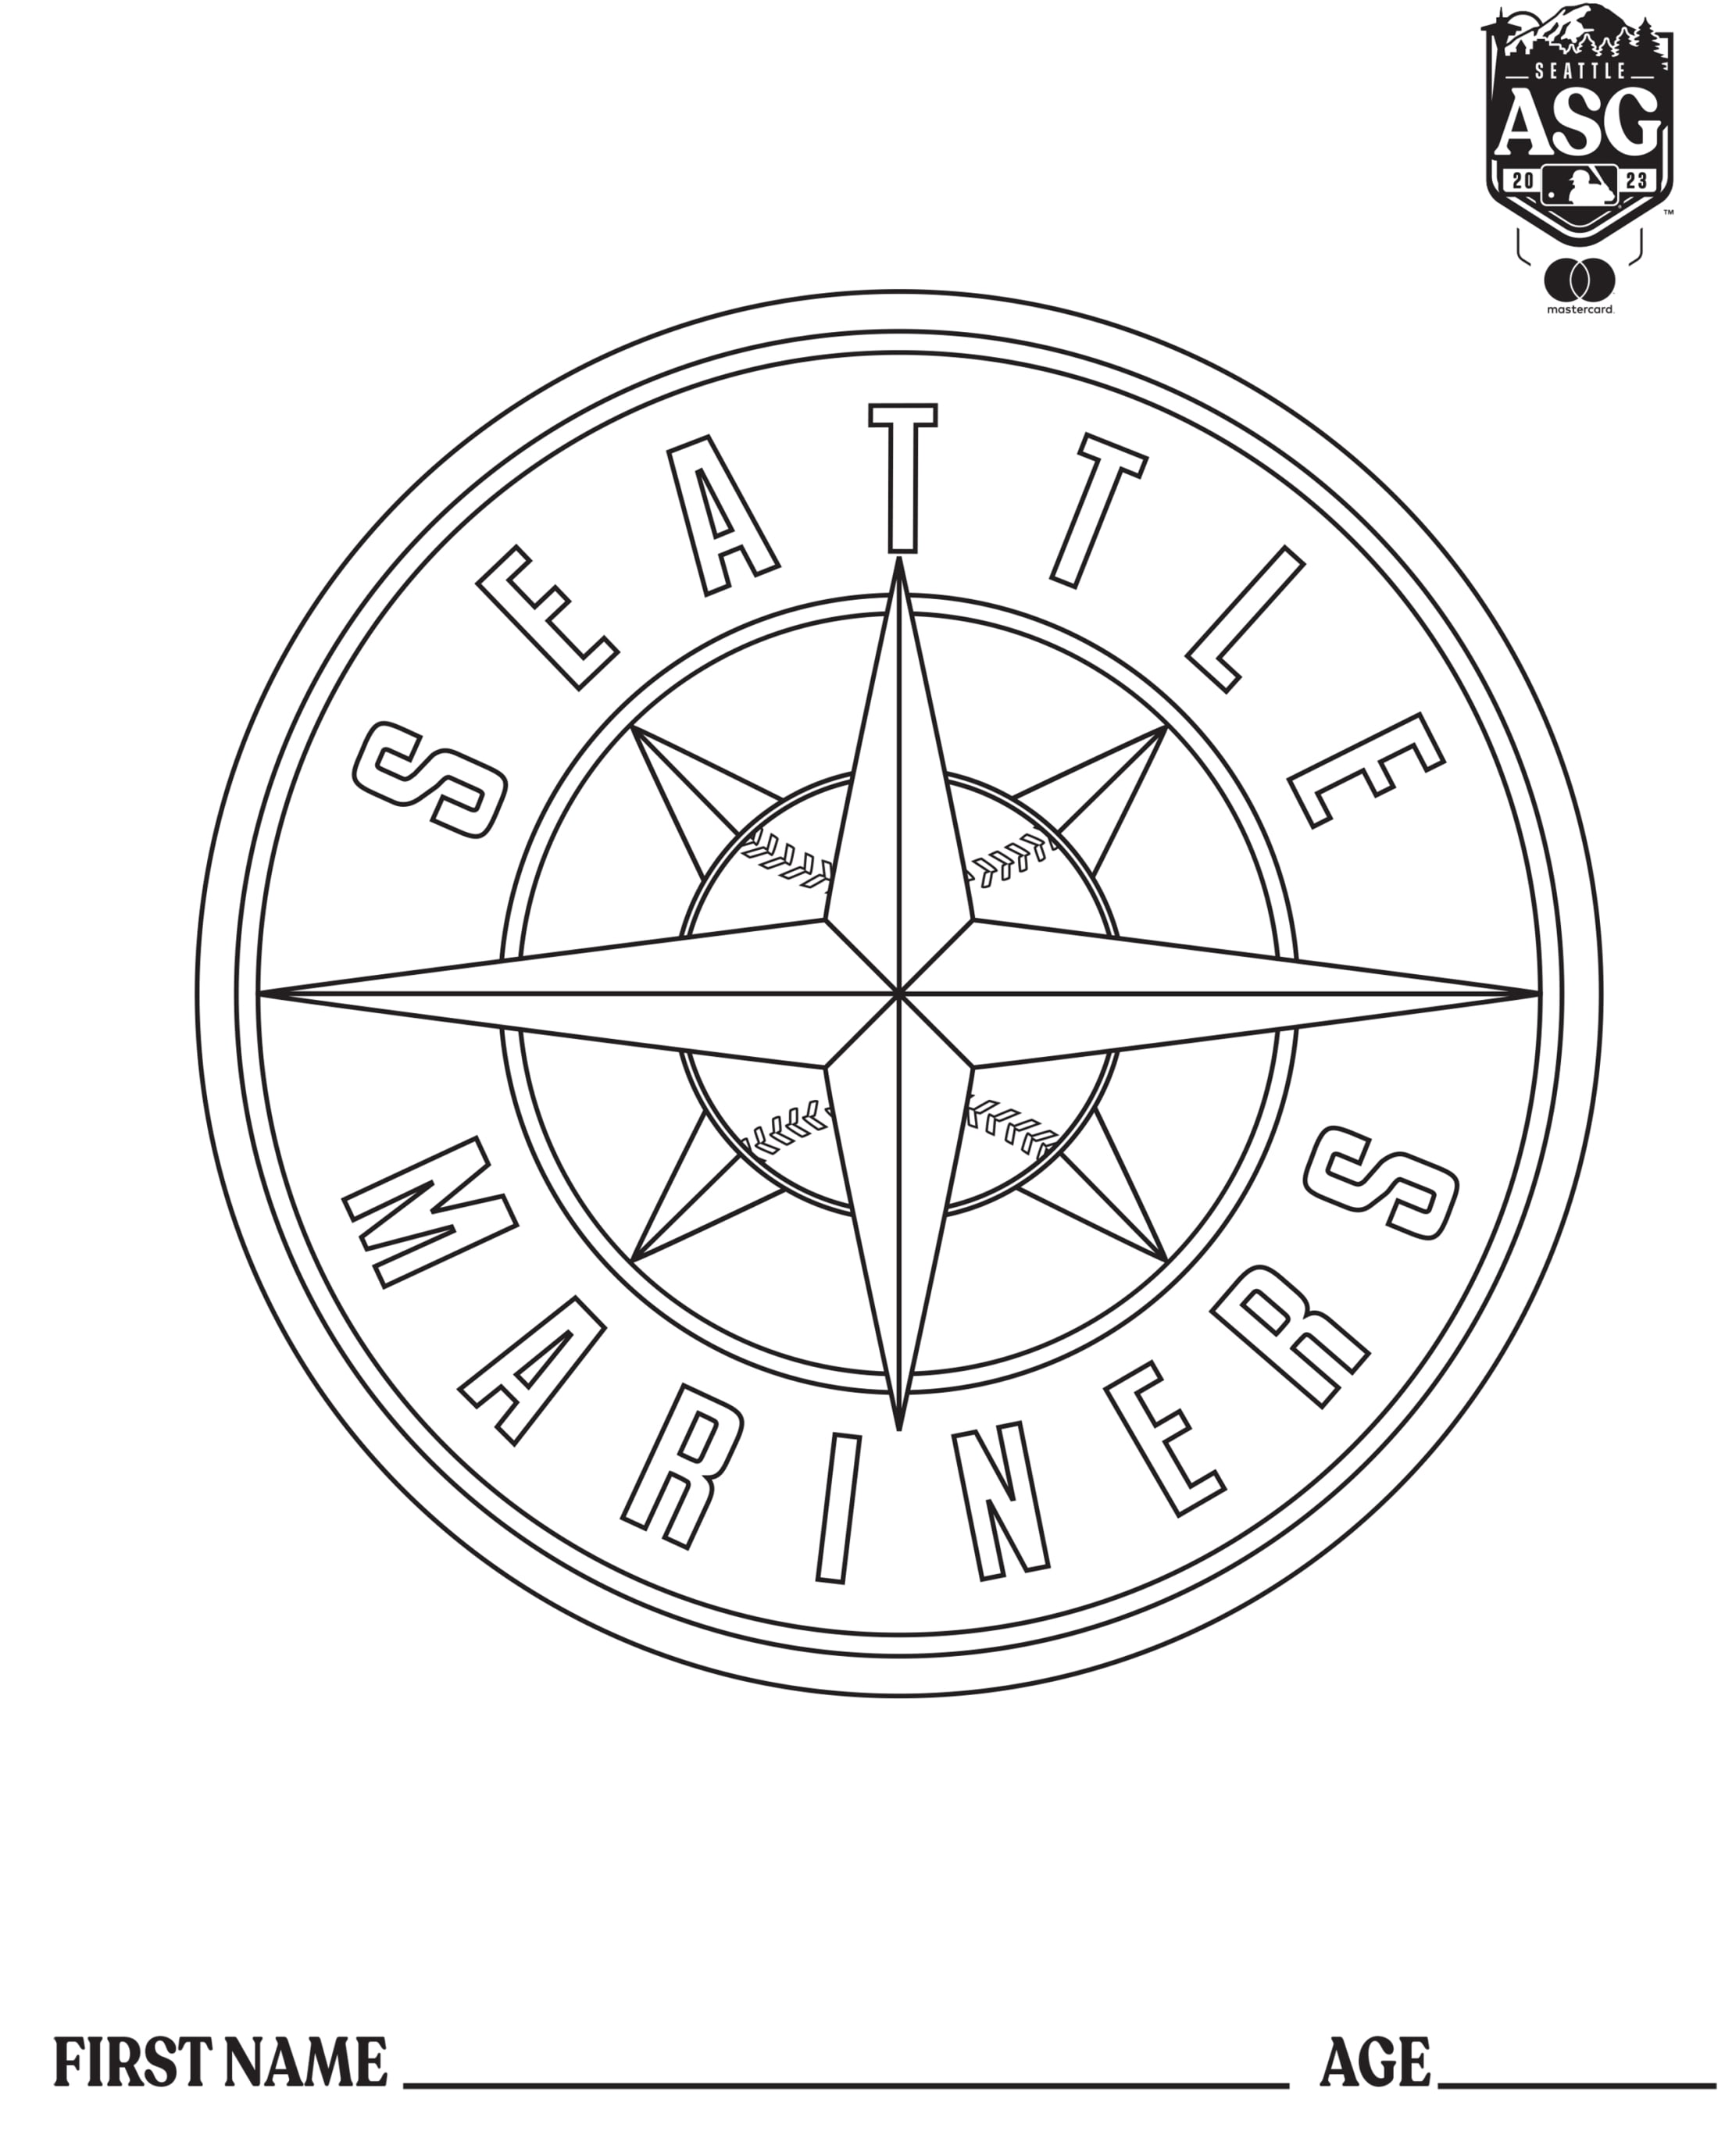 seahawks logo coloring page